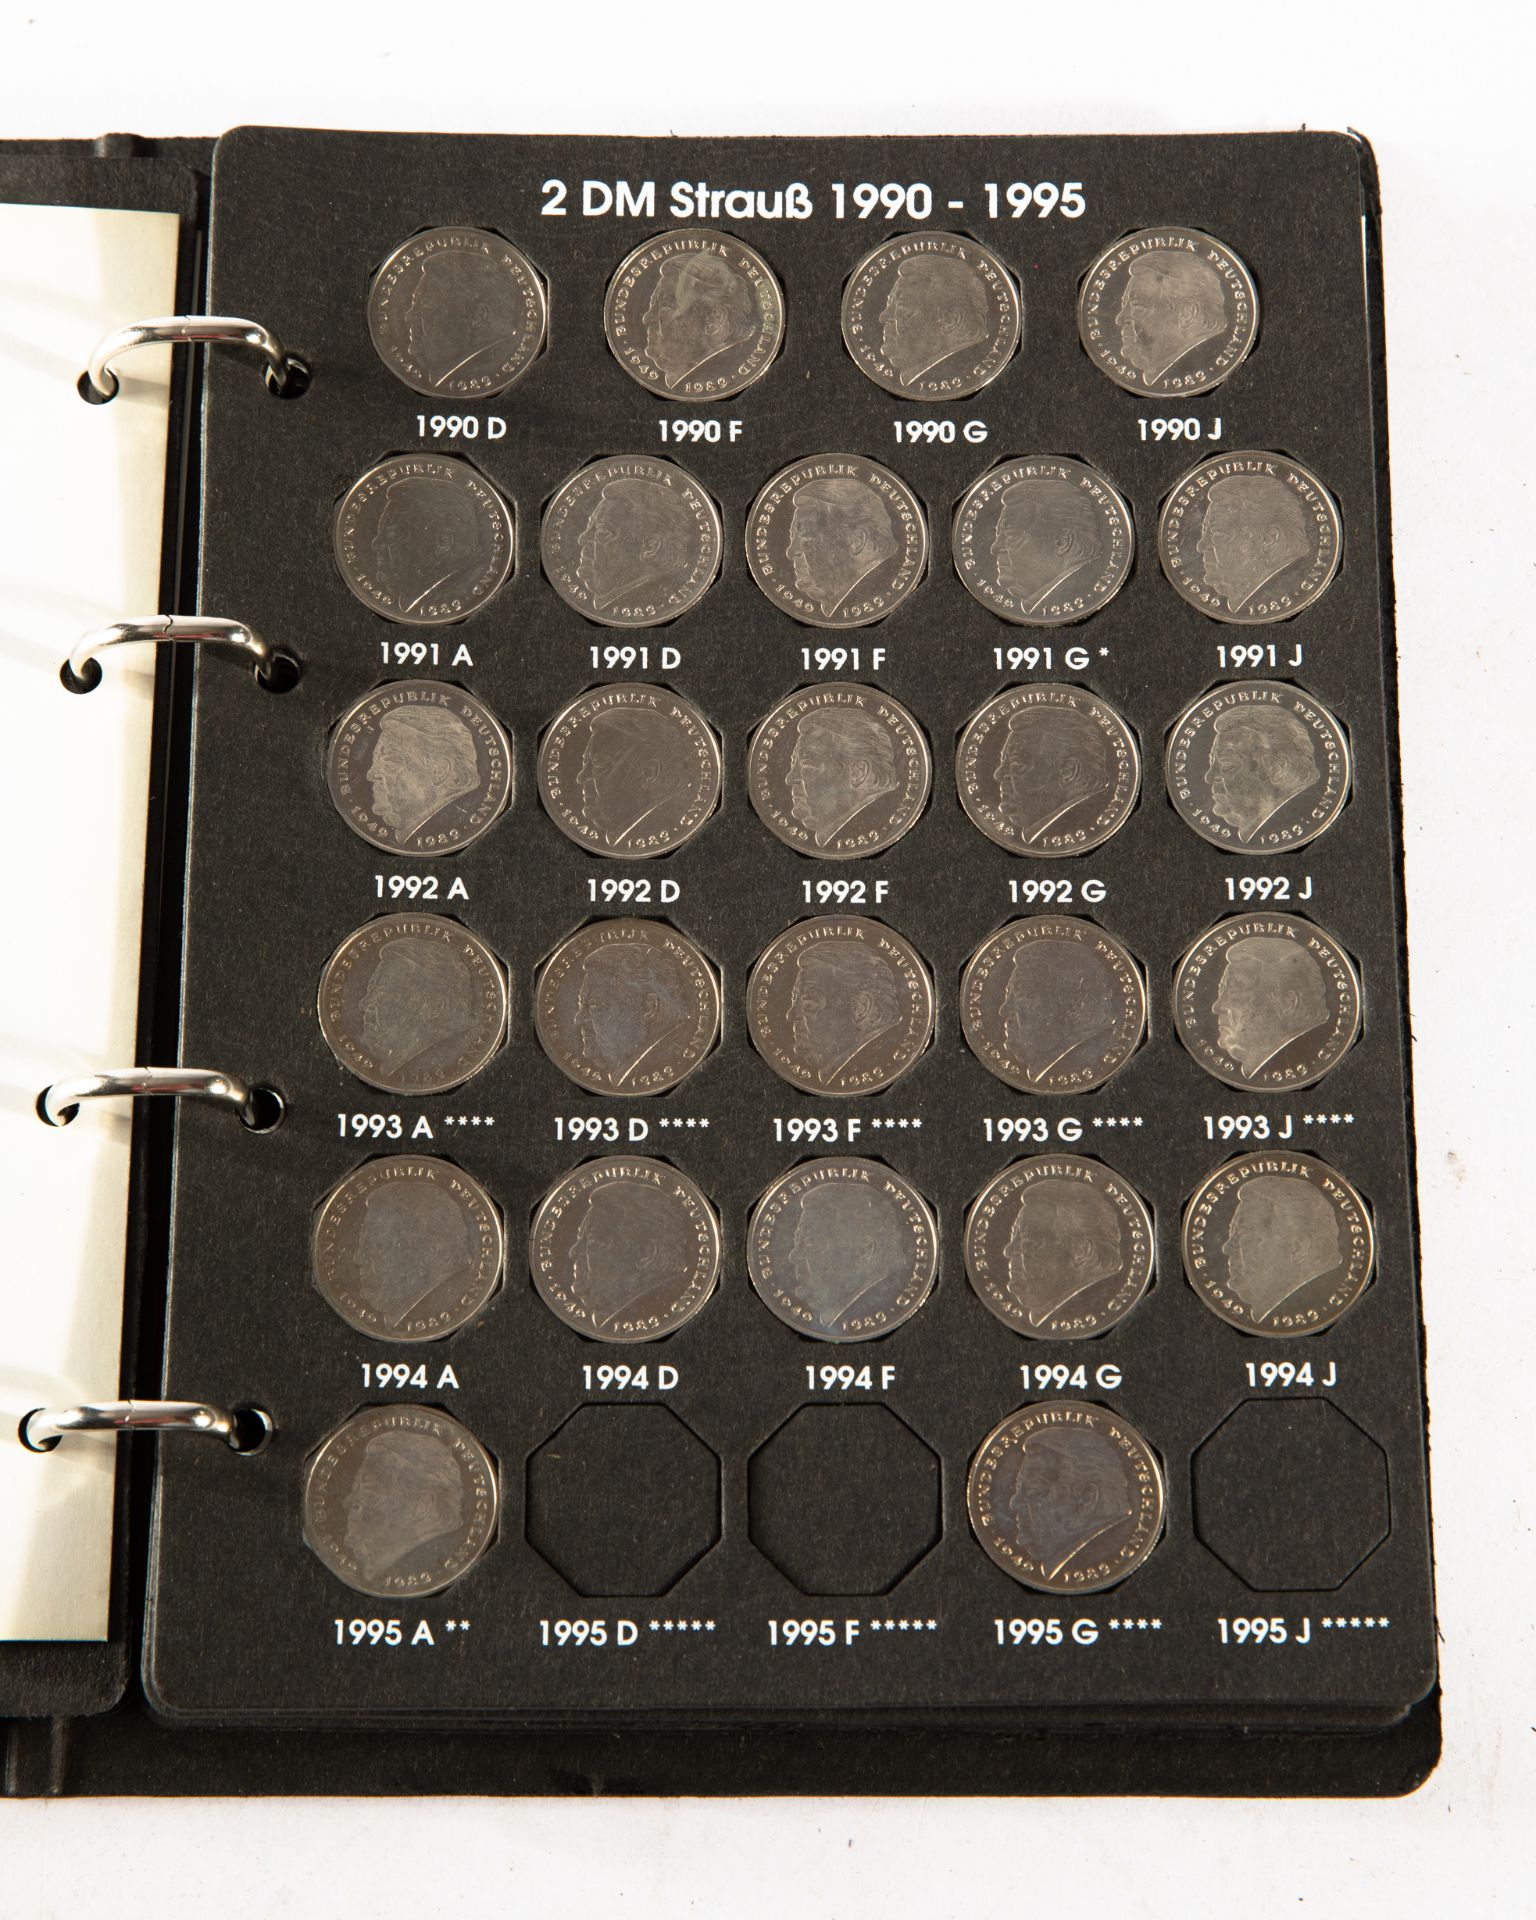 Germany - 2x full coin albums 2 DM Coins 1970-1996 - Image 28 of 33